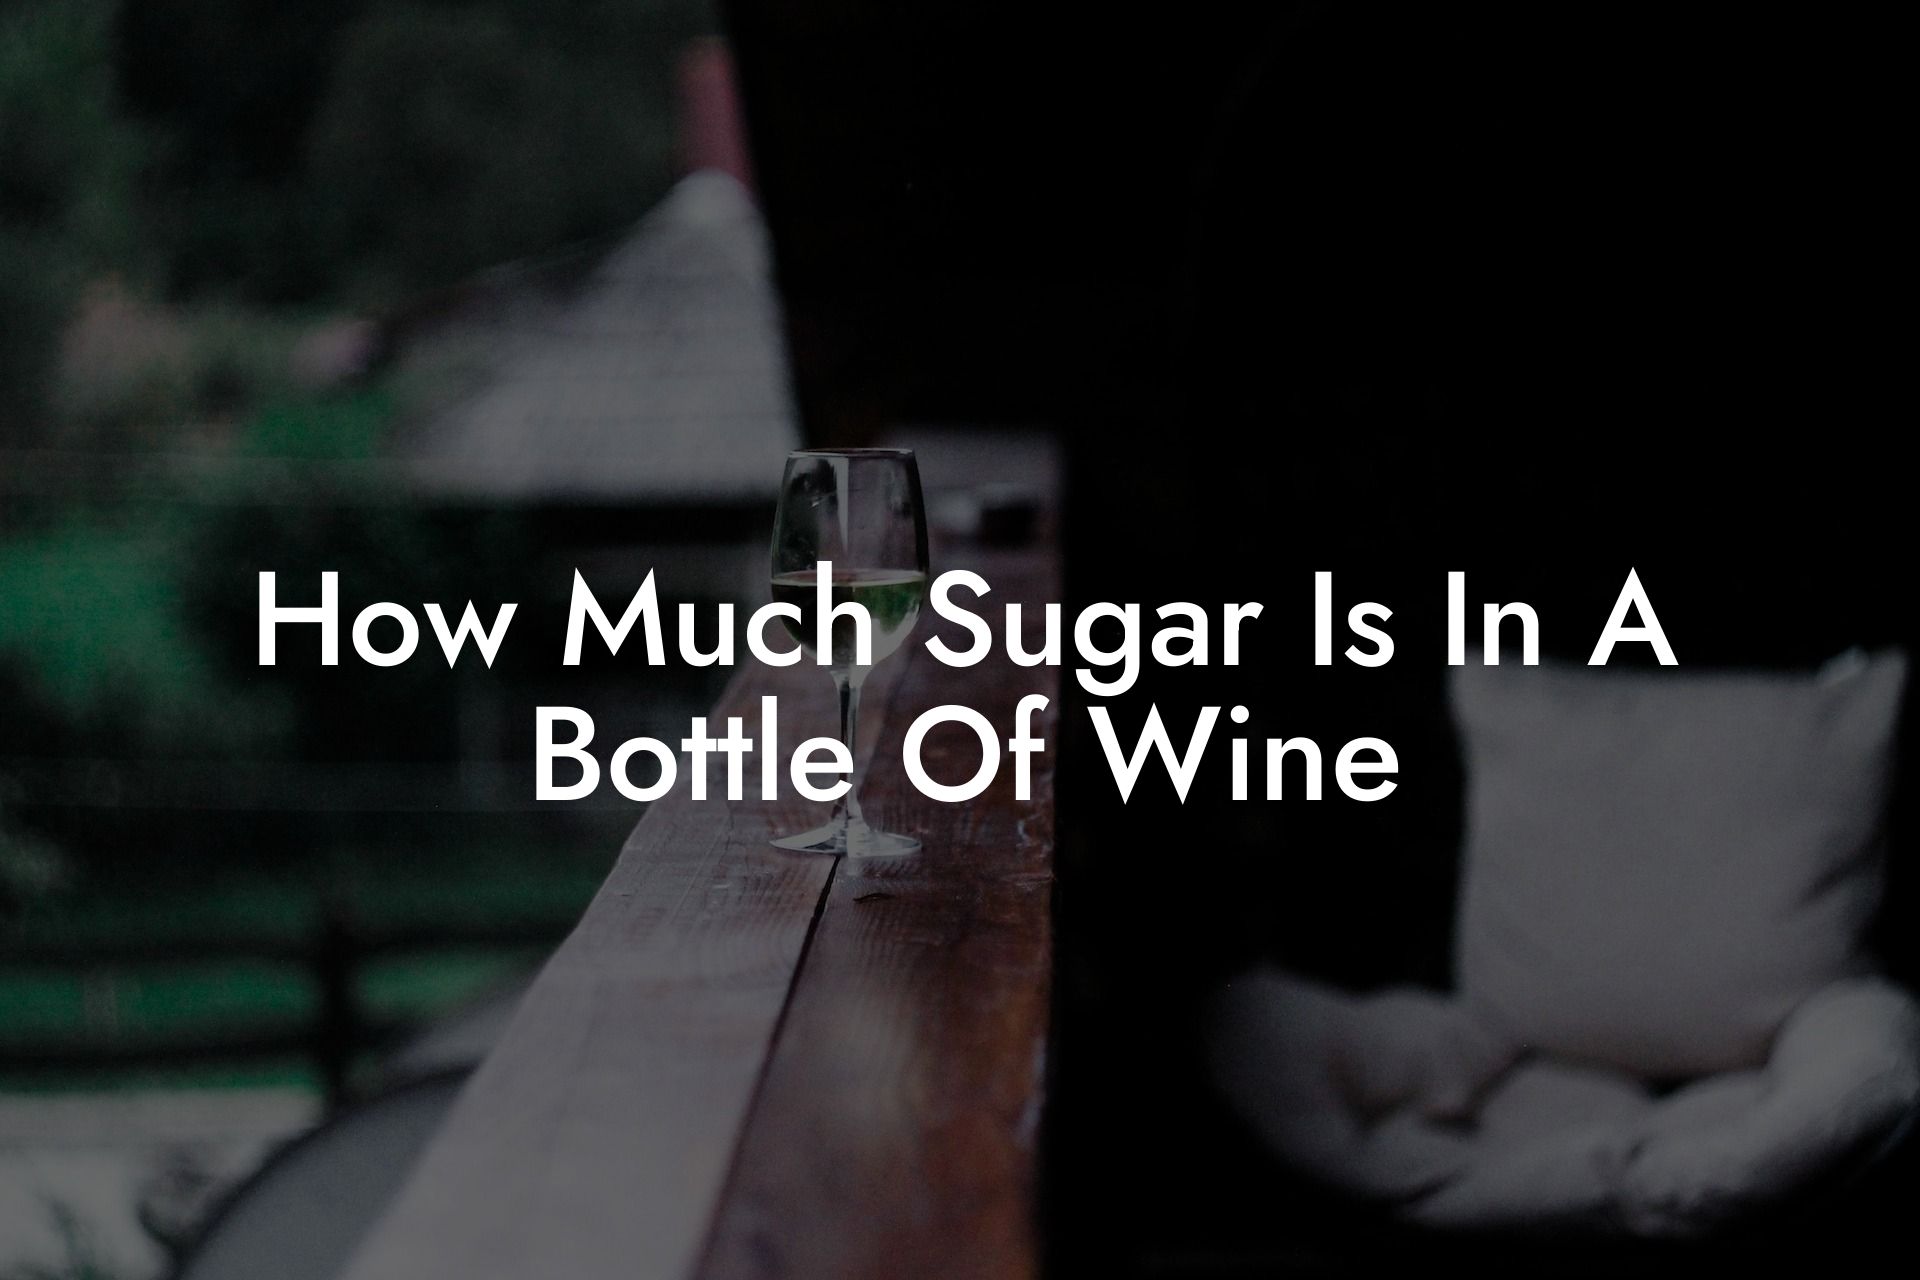 How Much Sugar Is In A Bottle Of Wine